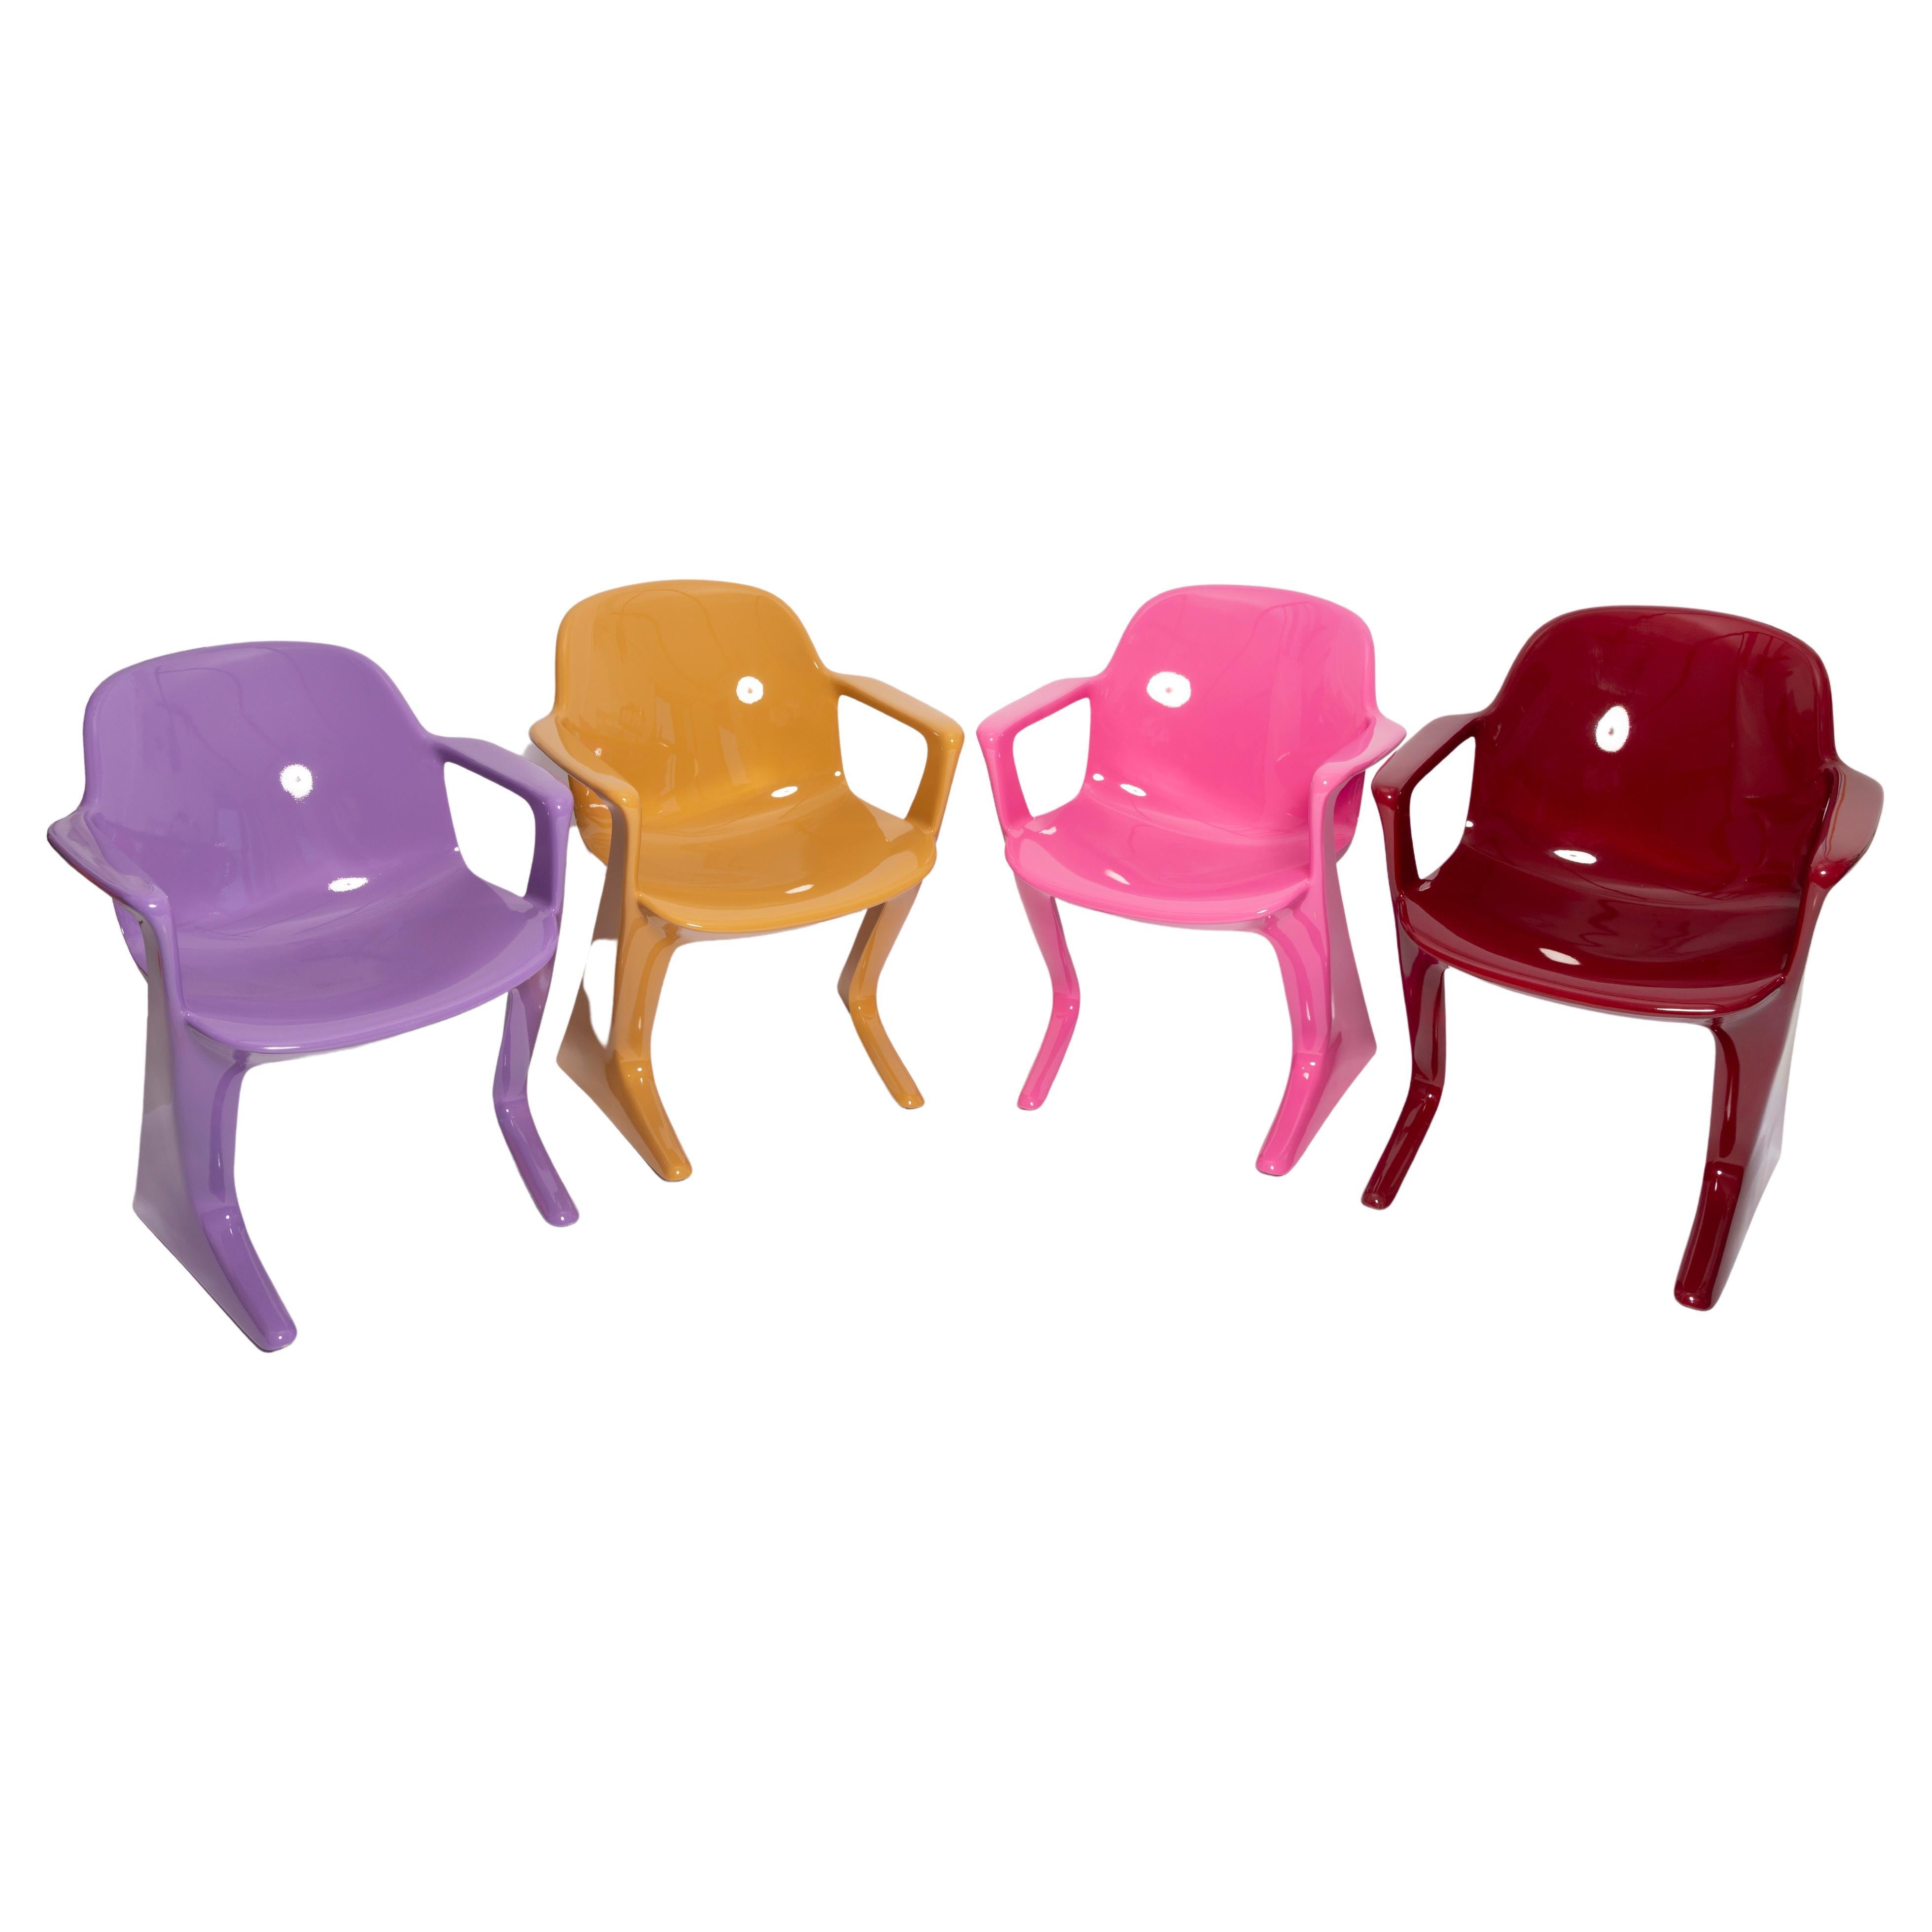 Set of Four Sand Pink Purple and Red Kangaroo Chairs, Ernst Moeckl, Germany 1960 For Sale